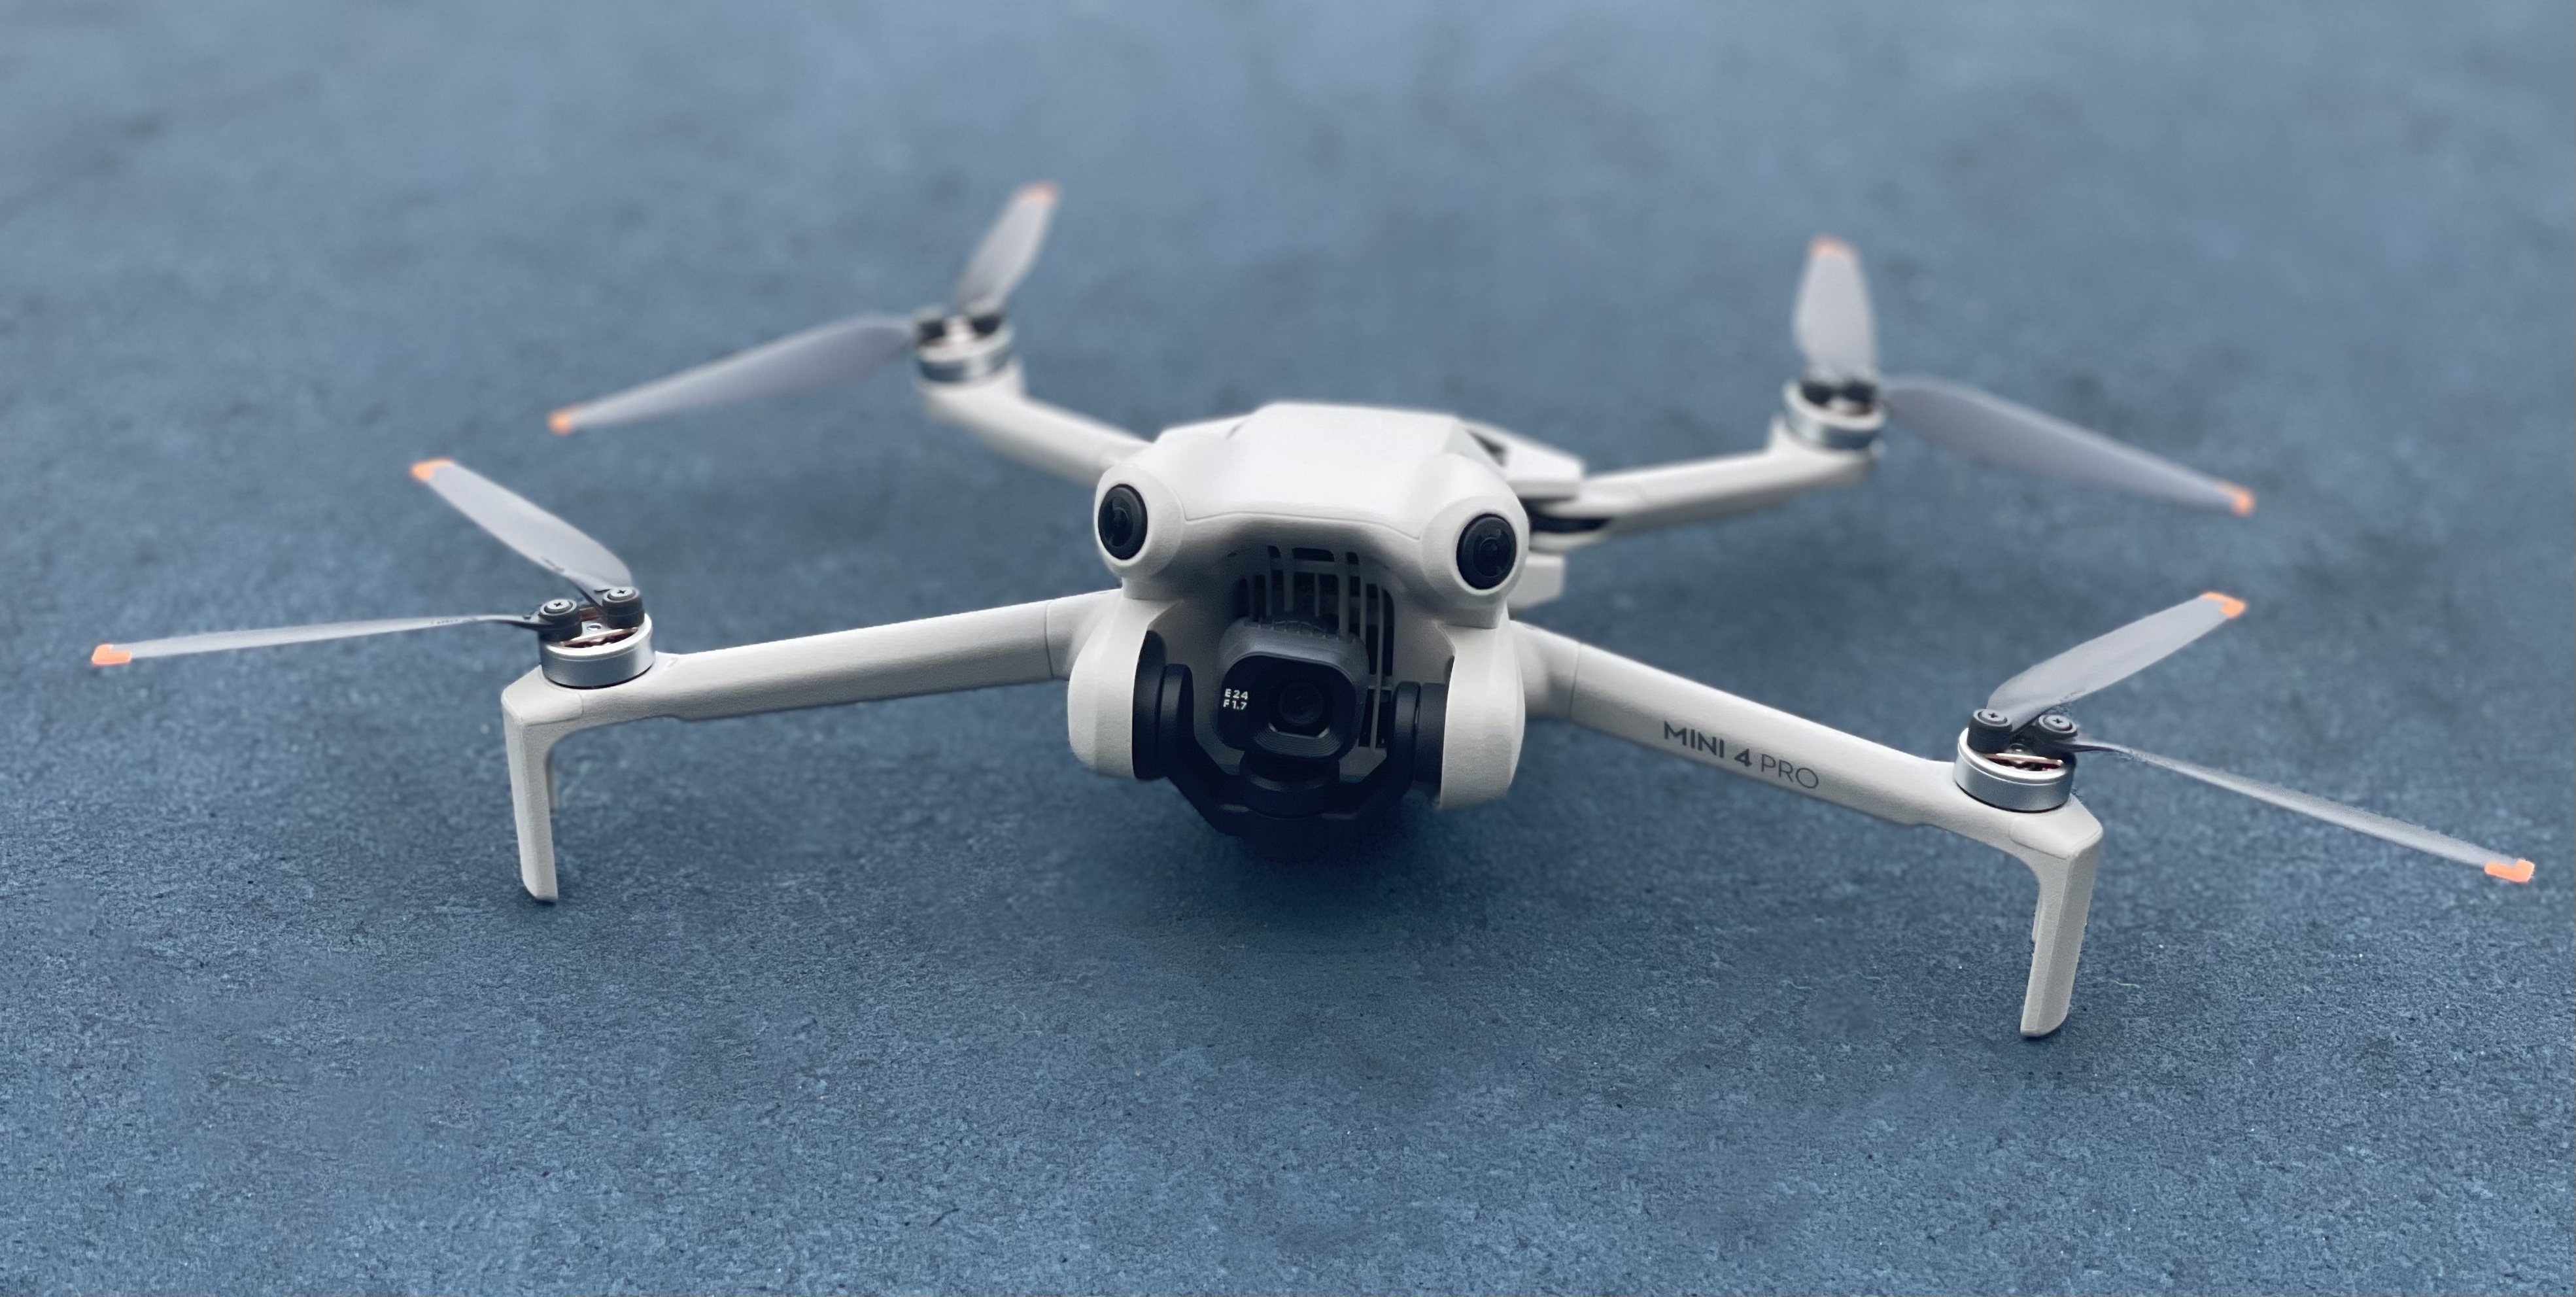 DJI's Mini 4 Pro is here. Is it worth an upgrade or first-time purchase?